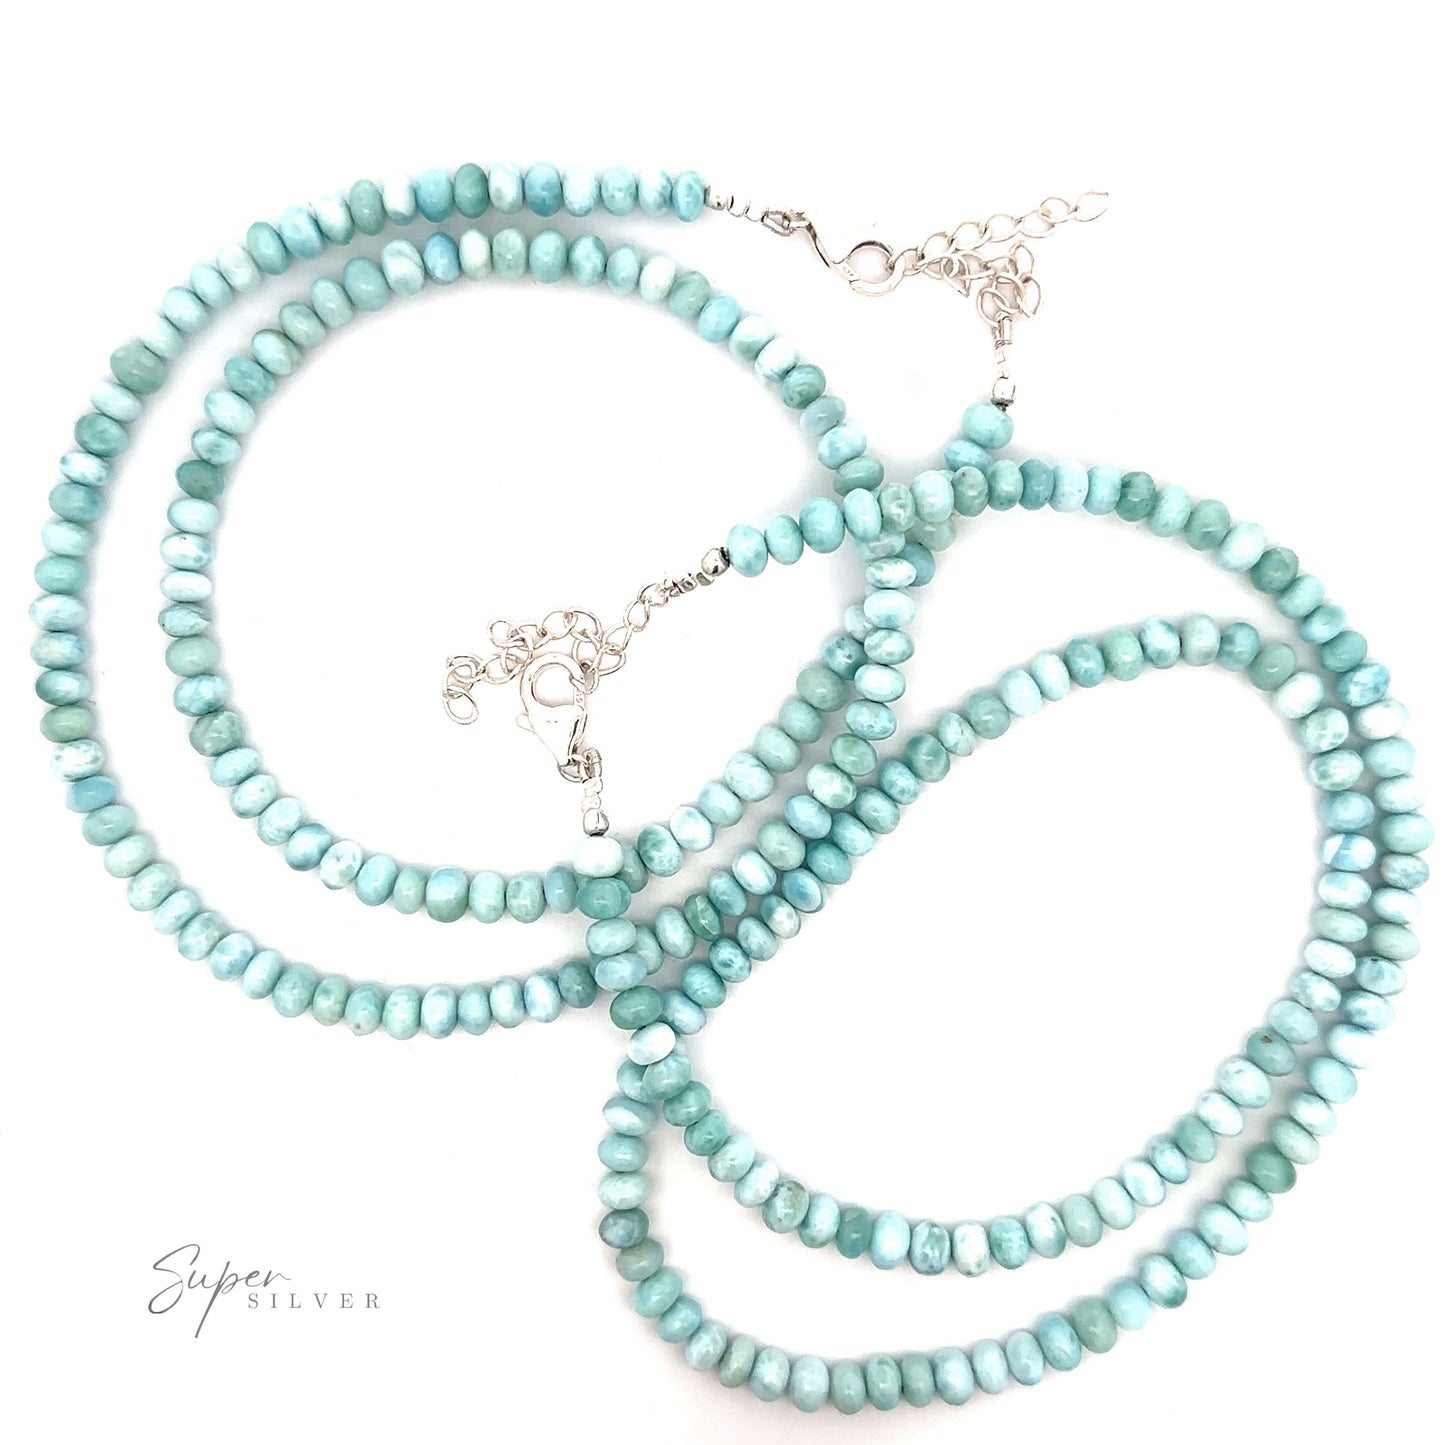 
                  
                    A turquoise beaded necklace with small, round beads and silver clasps arranged in loops against a white background, reminiscent of a Larimar Beaded Necklace.
                  
                